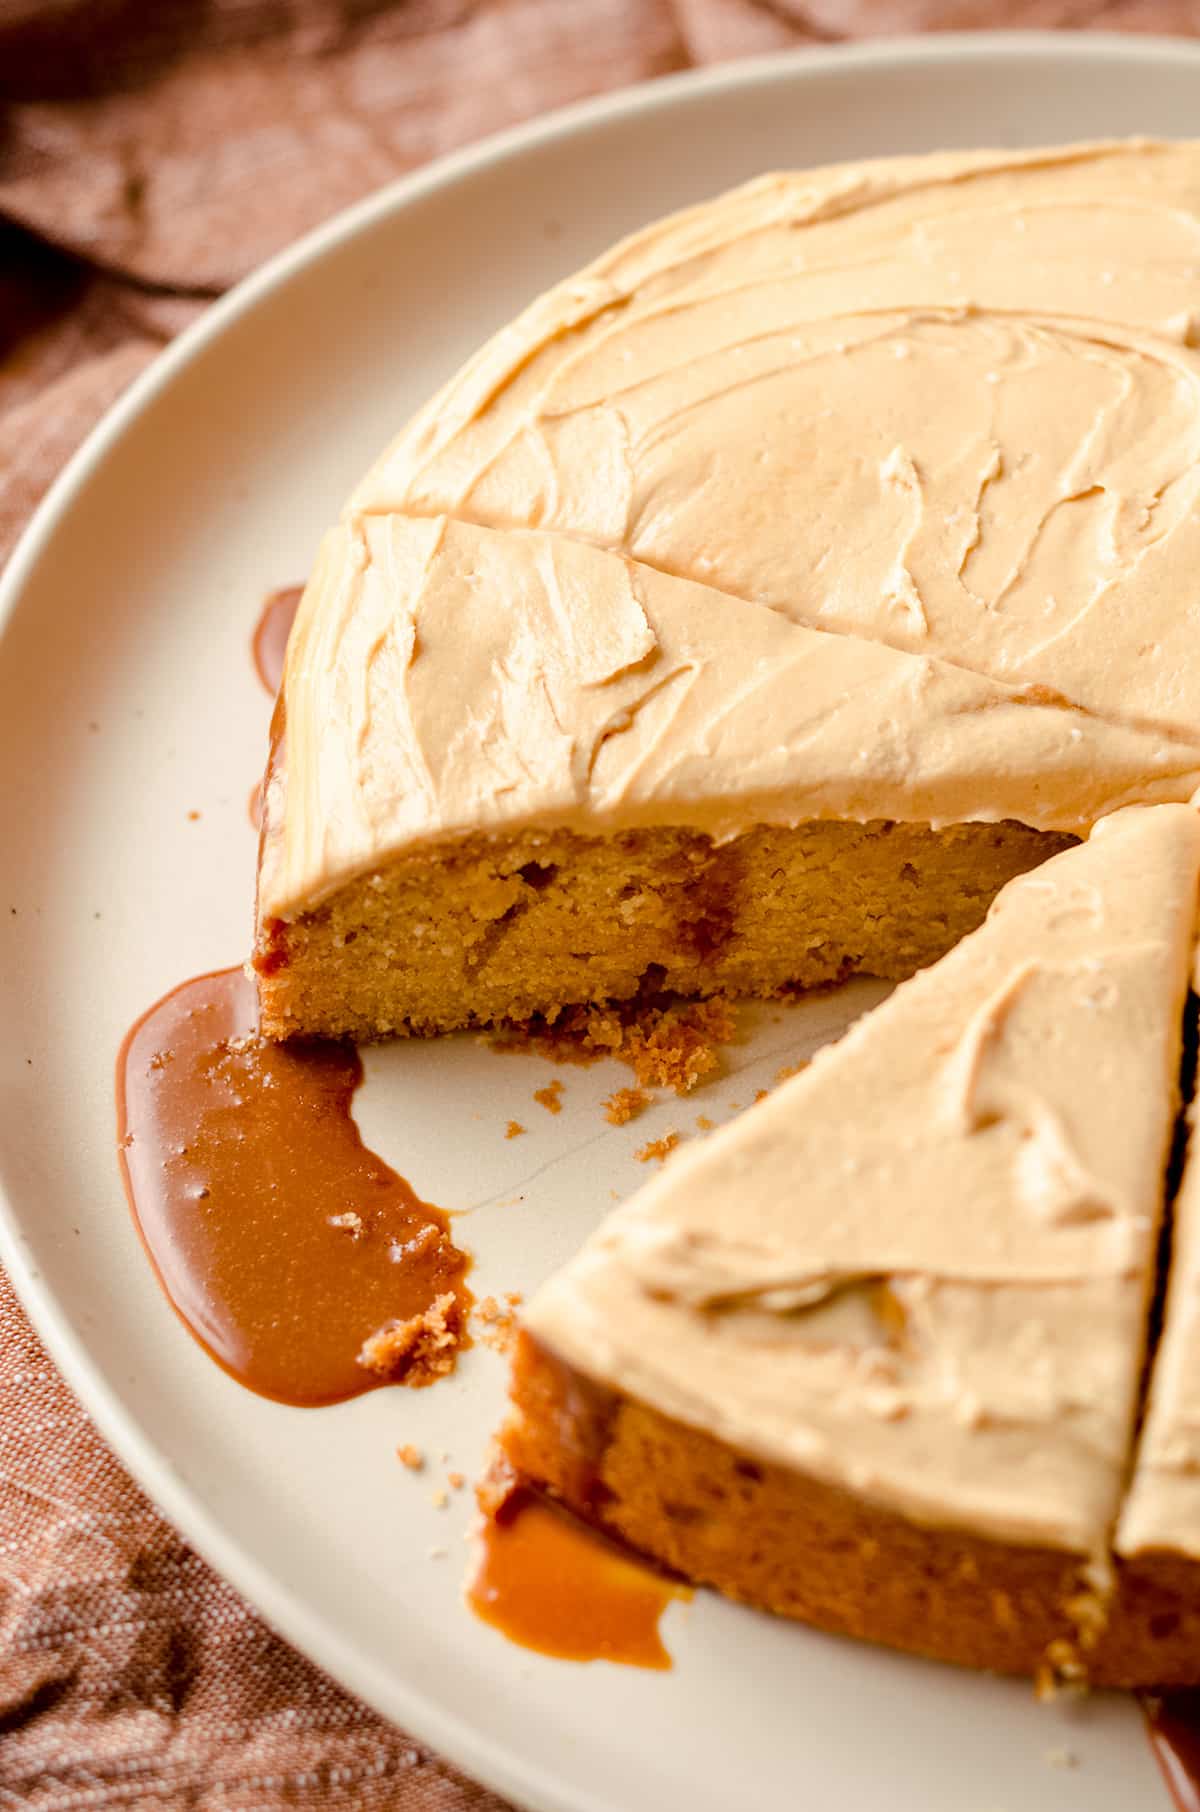 A cake with dulce de leche collecting around the plate.